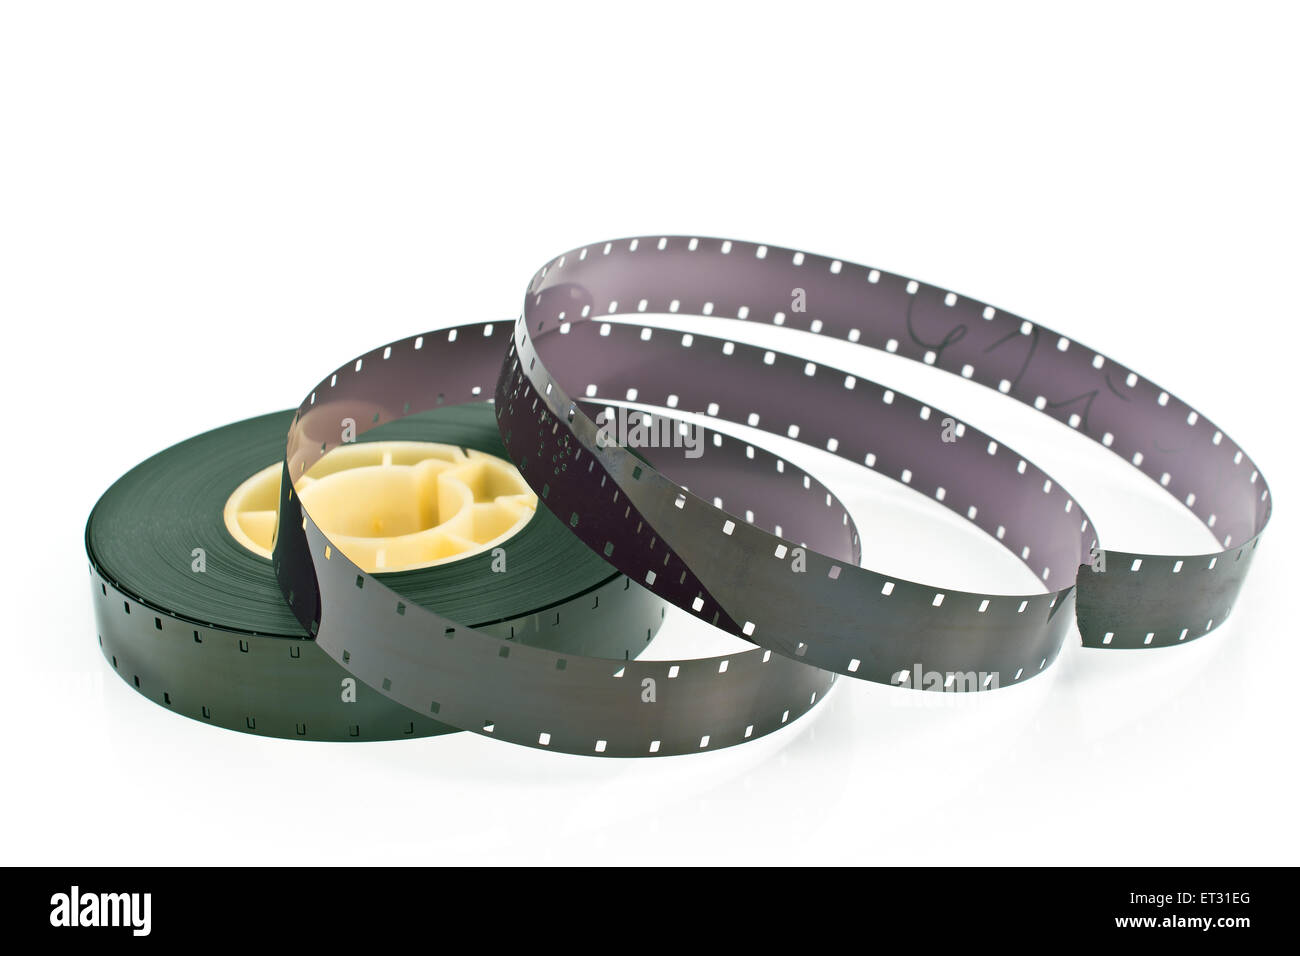 16mm film reel isolated on white Stock Photo